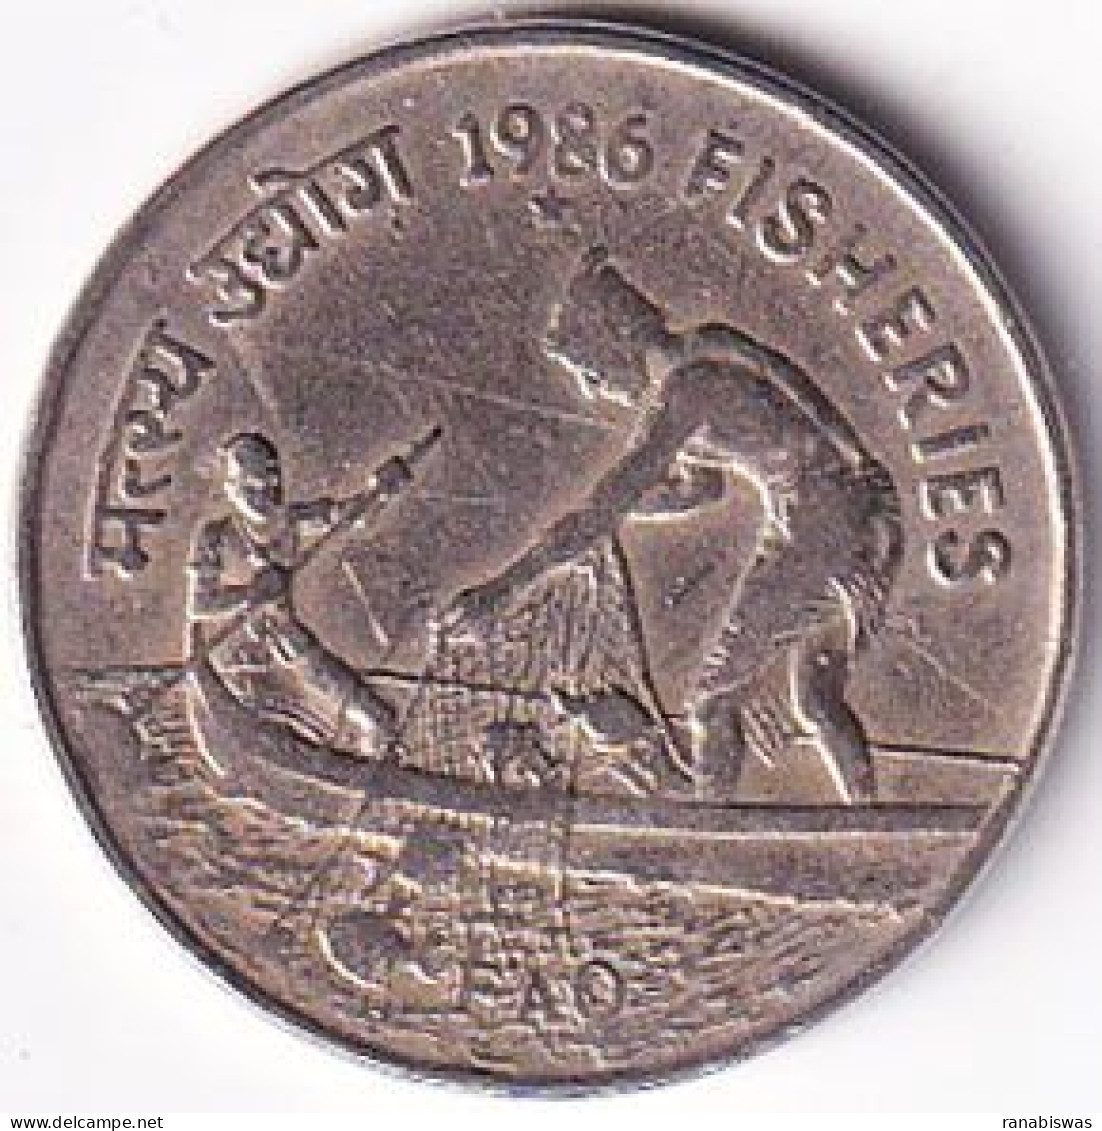 INDIA COIN LOT 27, 50 PAISE 1986, FISHERIES, FAO, HYDERABAD MINT, AUNC, SCARE - India